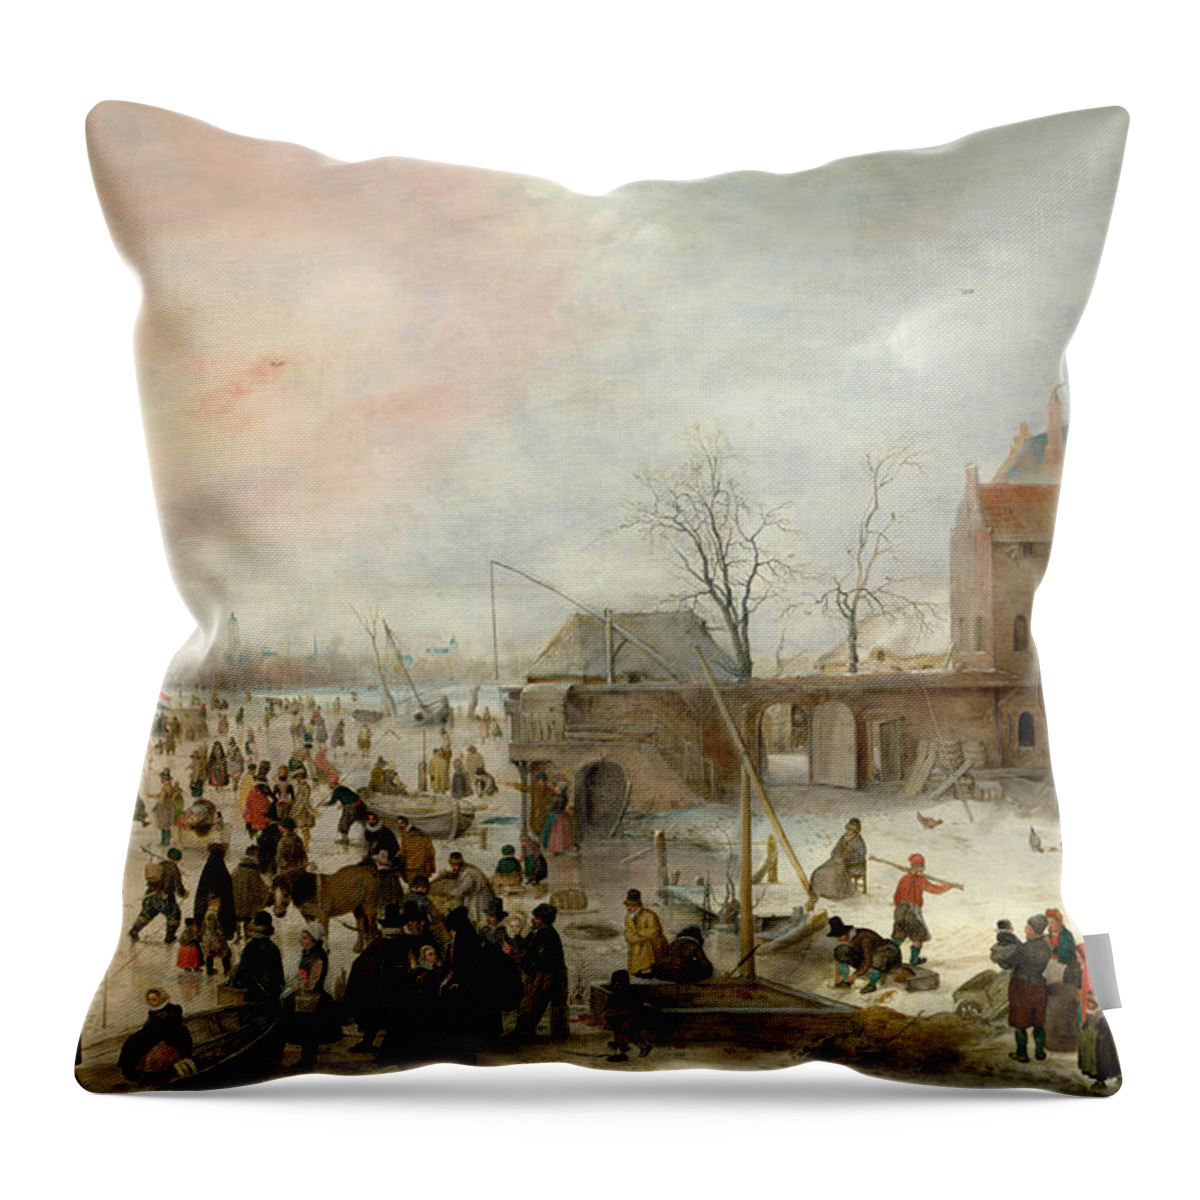 Hendrick Avercamp Throw Pillow featuring the painting A Scene on the Ice near a Town by Hendrick Avercamp